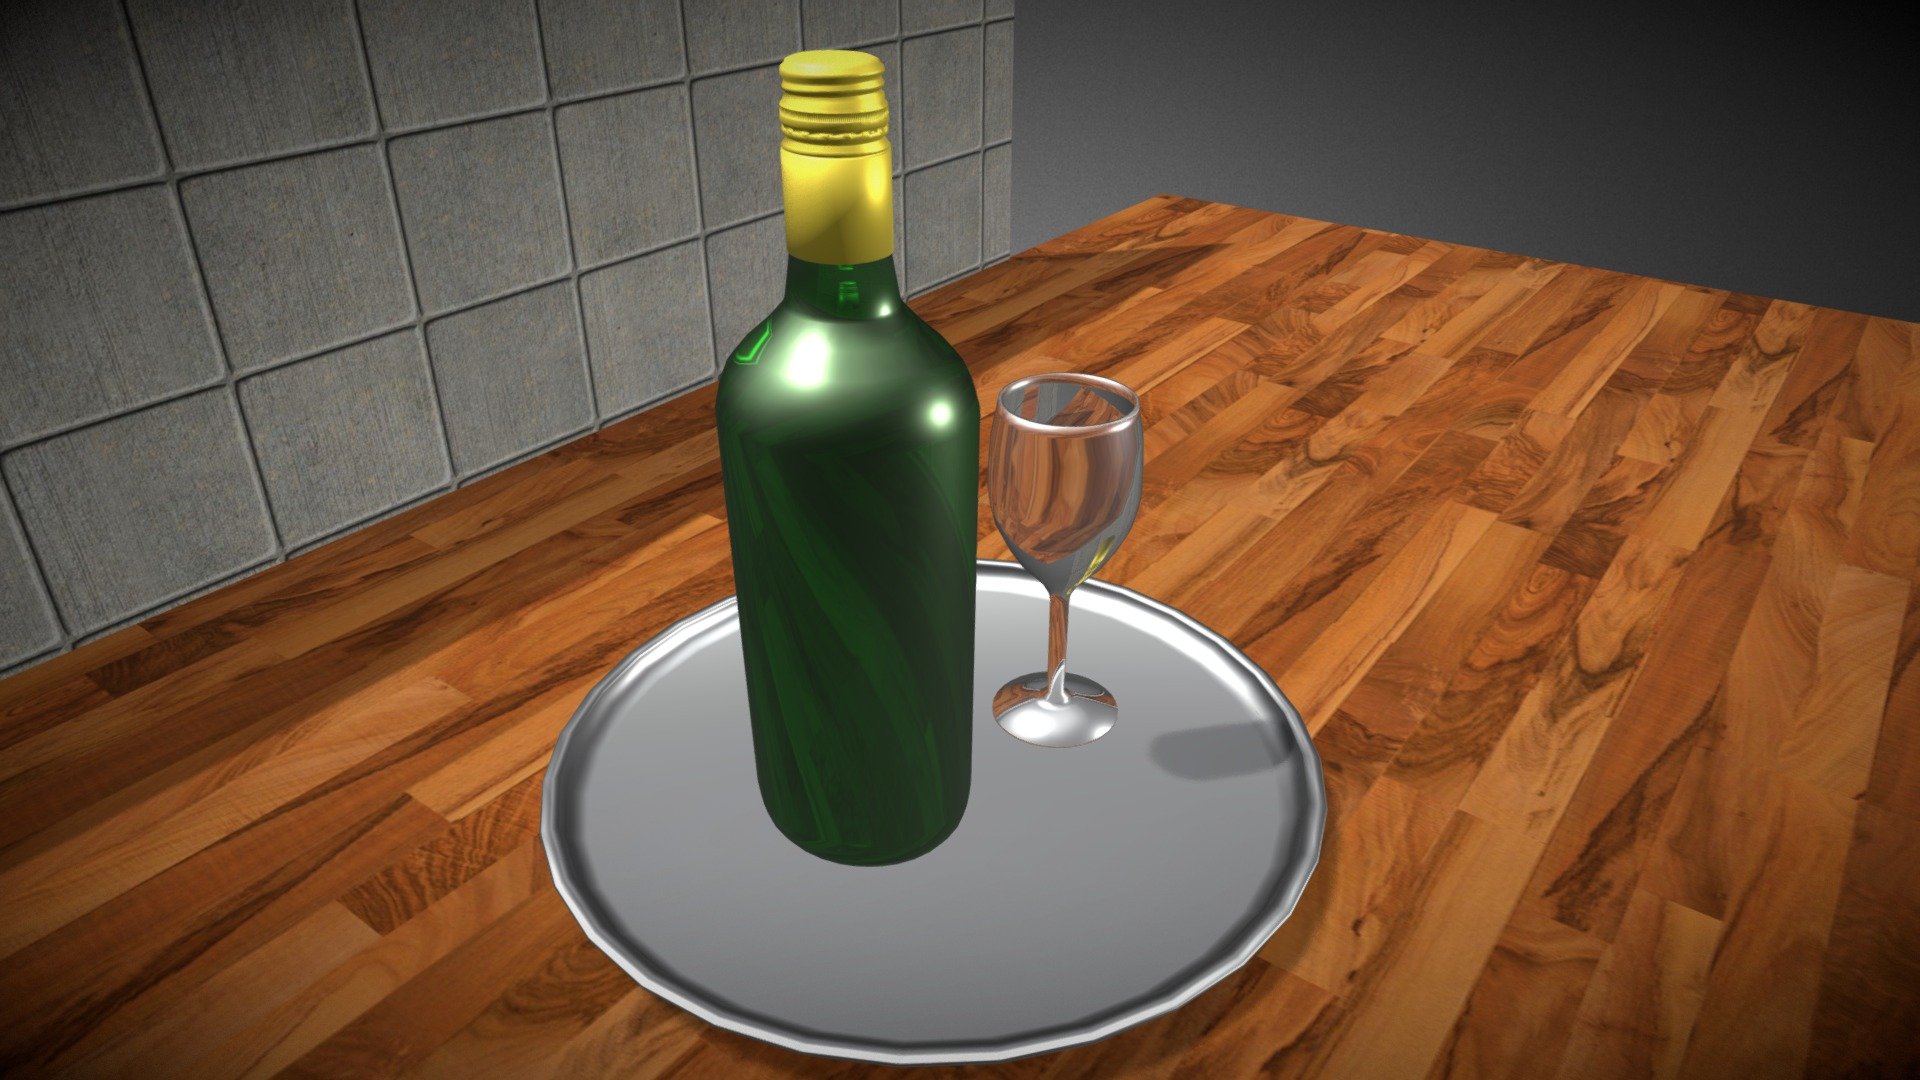 Wine Bottle, Glass and Plate